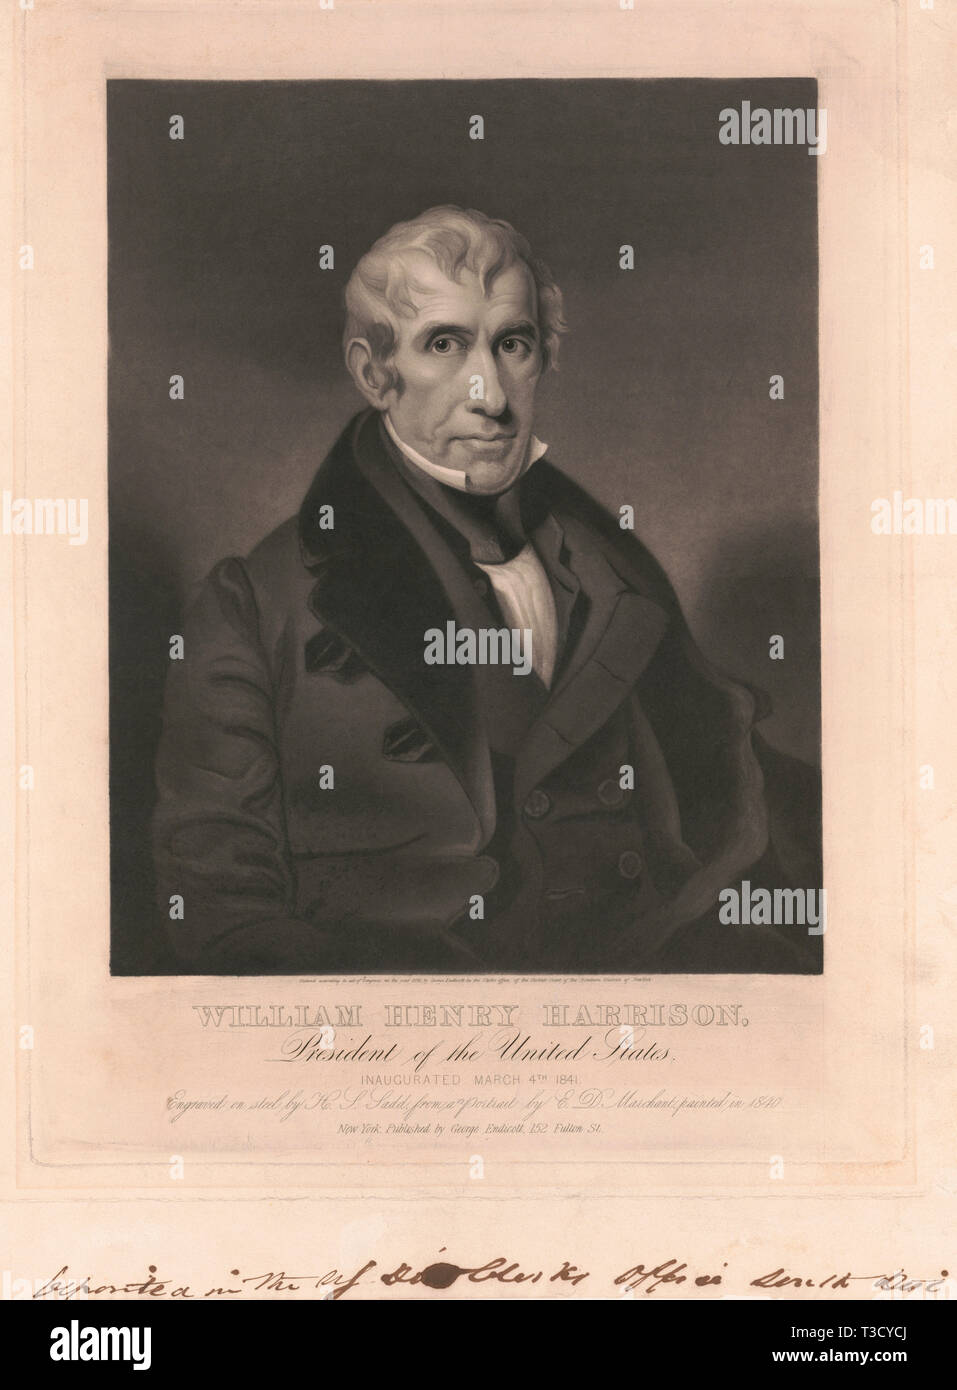 William Henry Harrison, President of the United States, Inaugurated March 4th 1841, painted by E. D. Marchant, Engraved on Steel by H.S. Sadd, 1841 Stock Photo